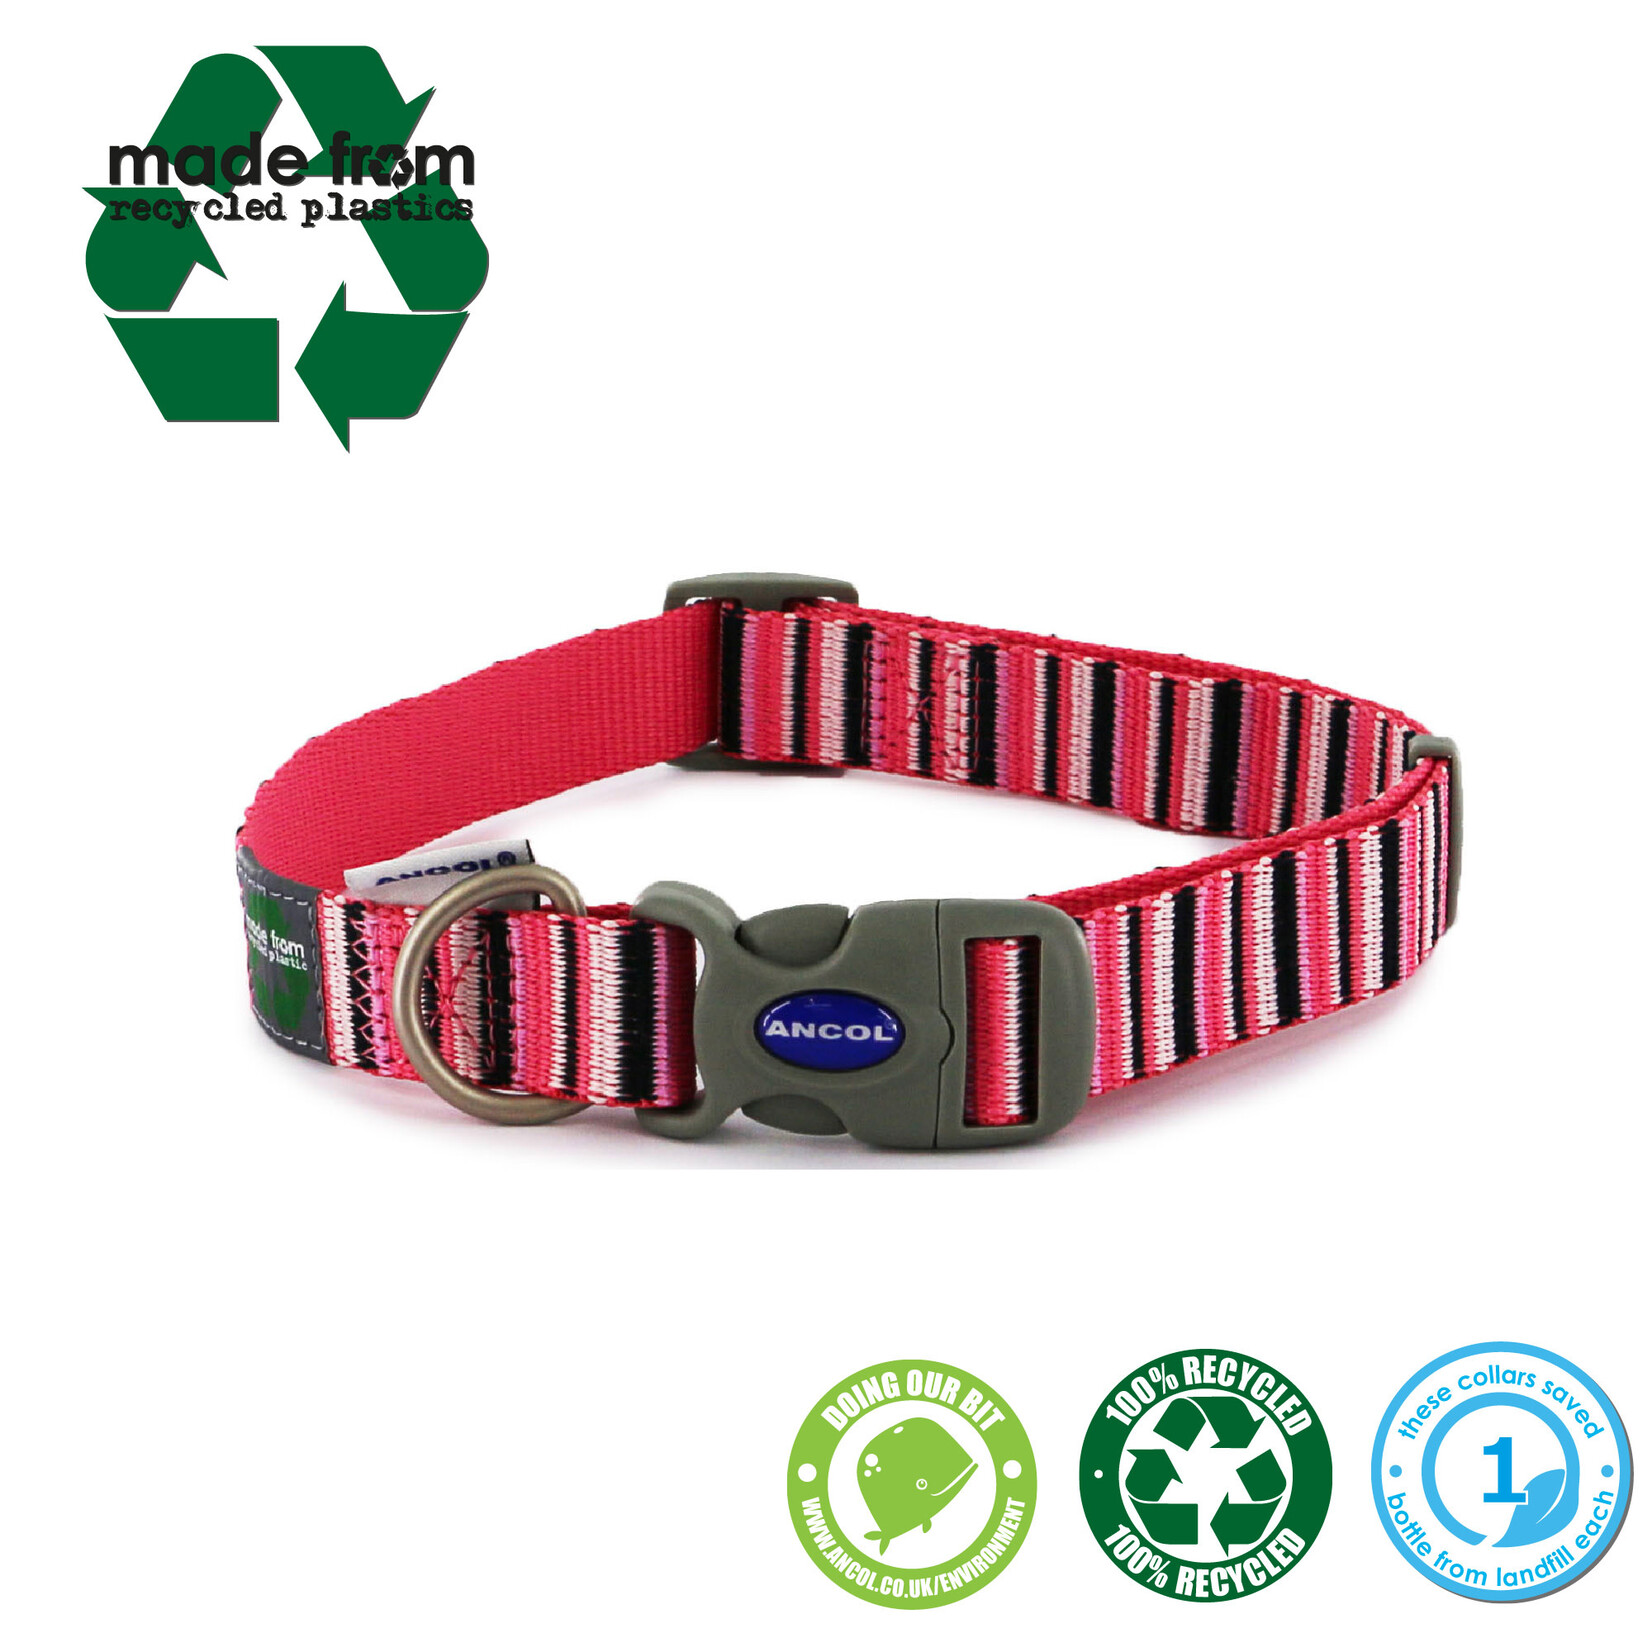 Ancol Adjustable Dog Collar Made From Recycled Materials, Hot Pink Candy